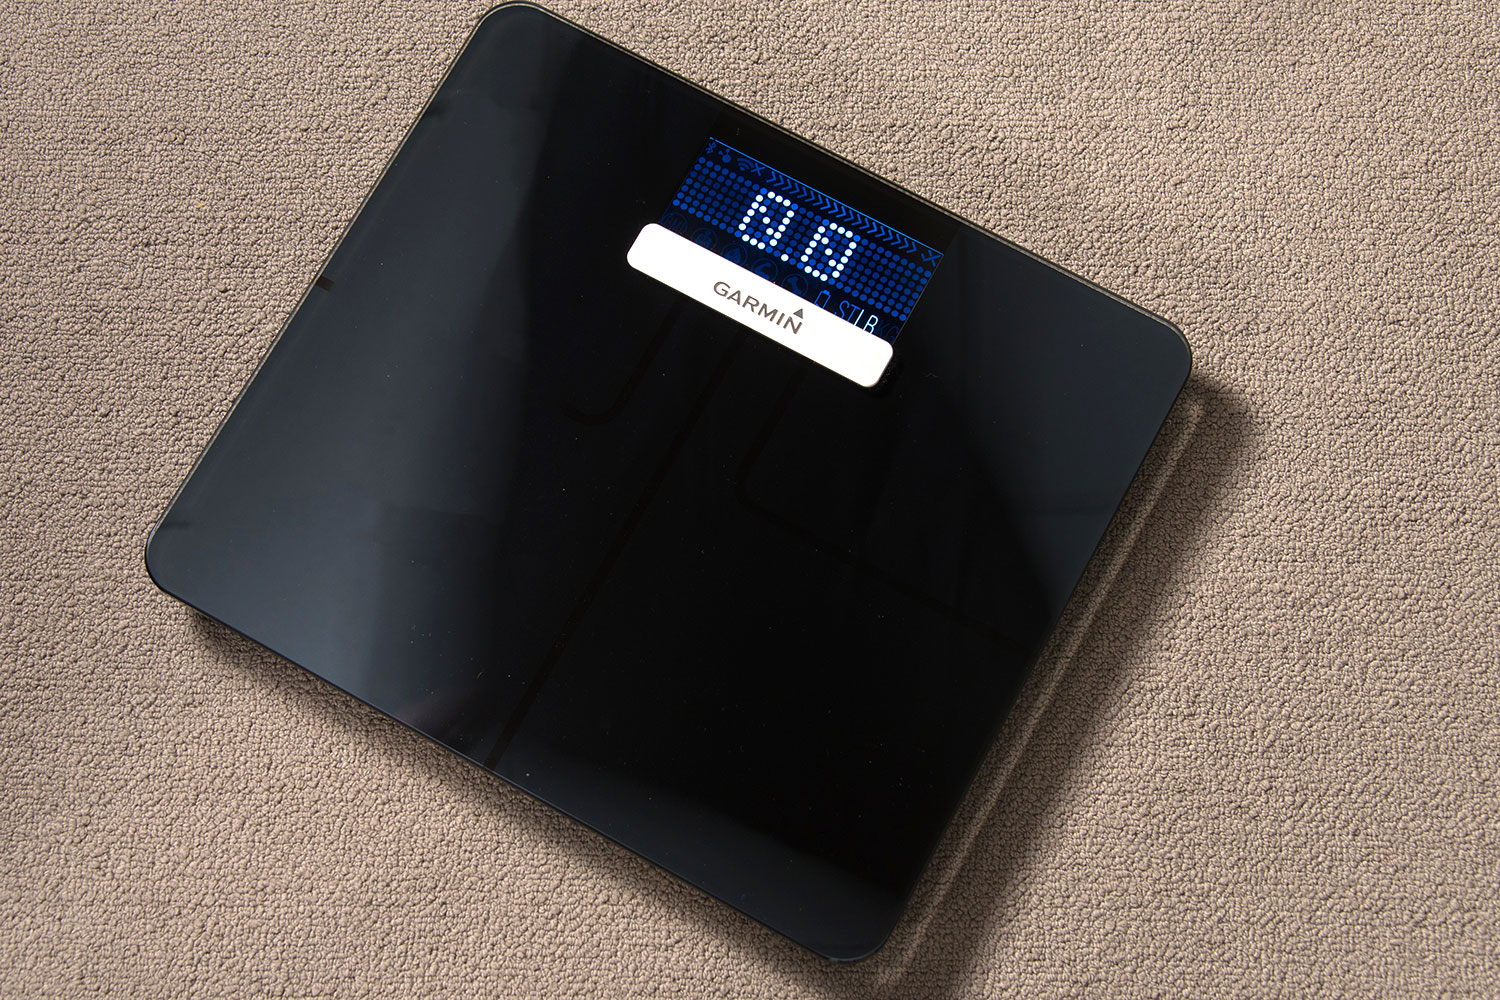  Garmin Index Smart Scale, Wi-Fi Digital Scale, Recognizes Up to  16 Users, Up to 9 Months of Battery Life, Black : Health & Household